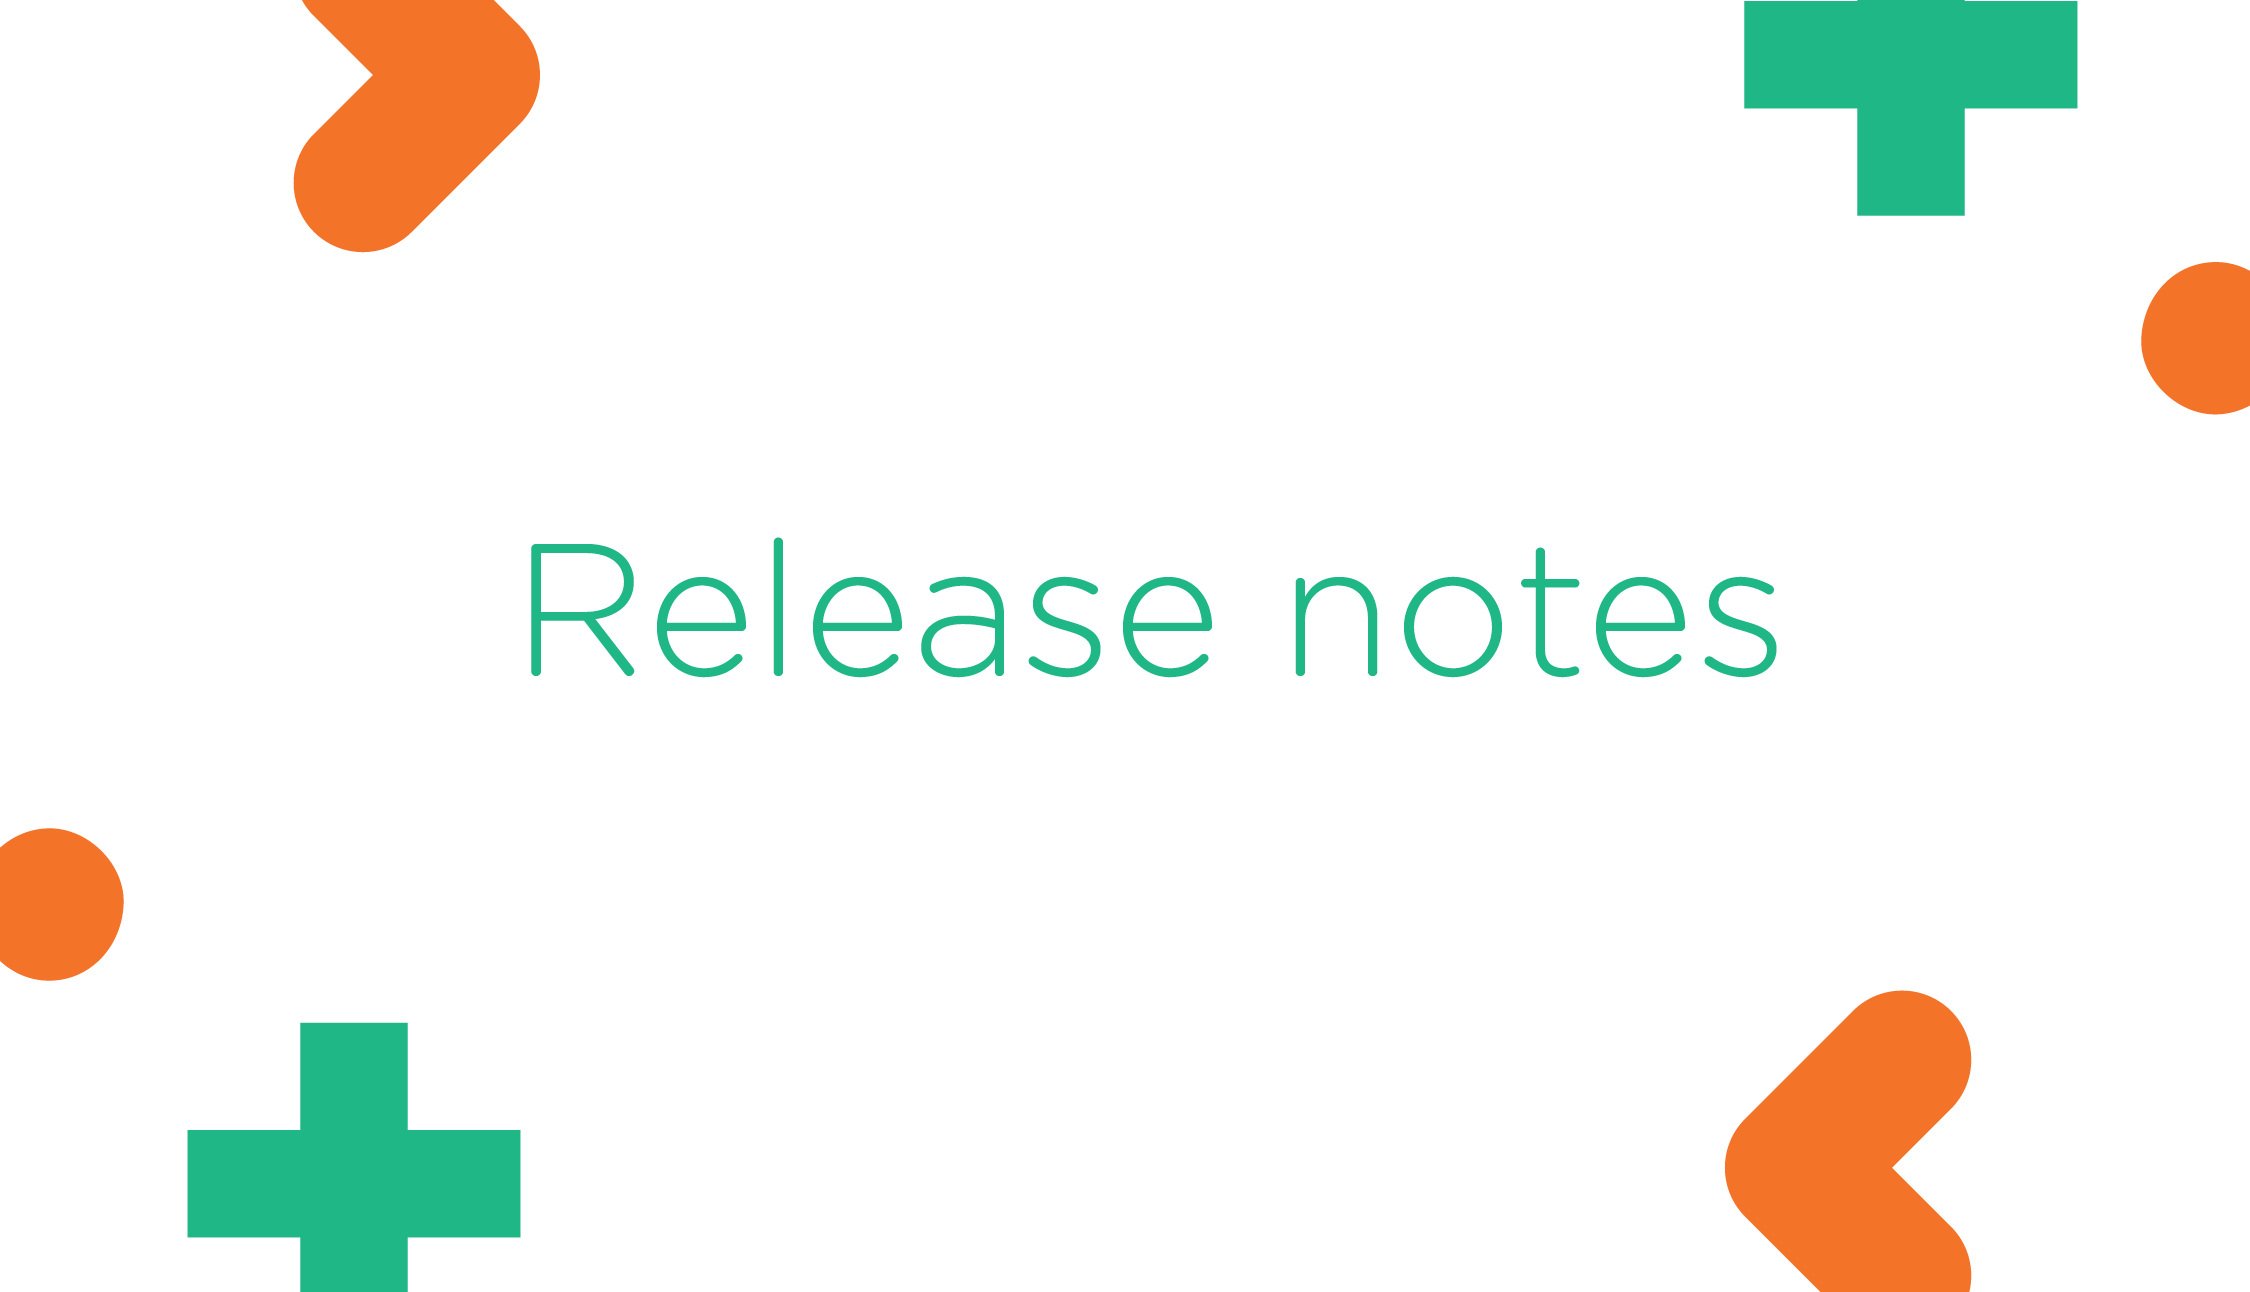 Release notes version 3.02